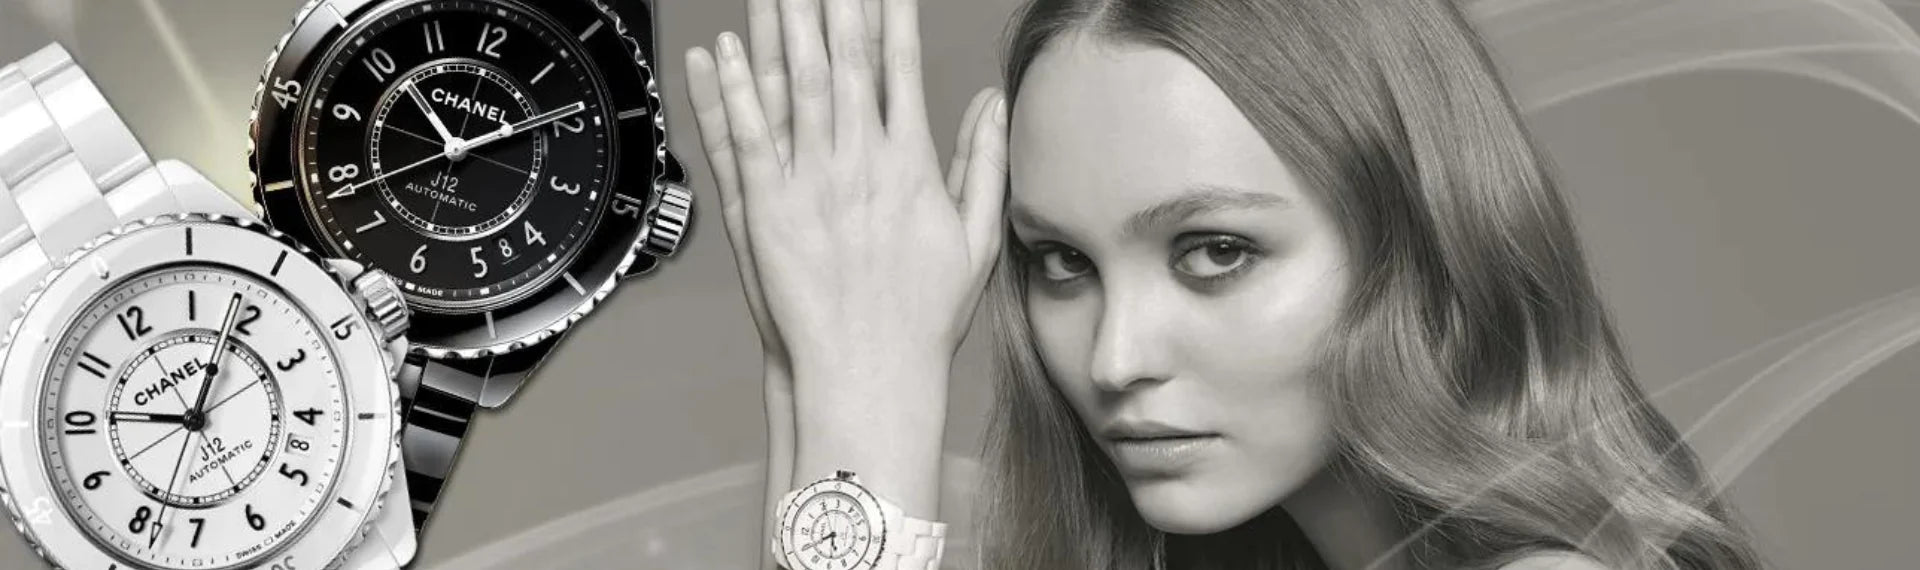 Chanel Watches for Women